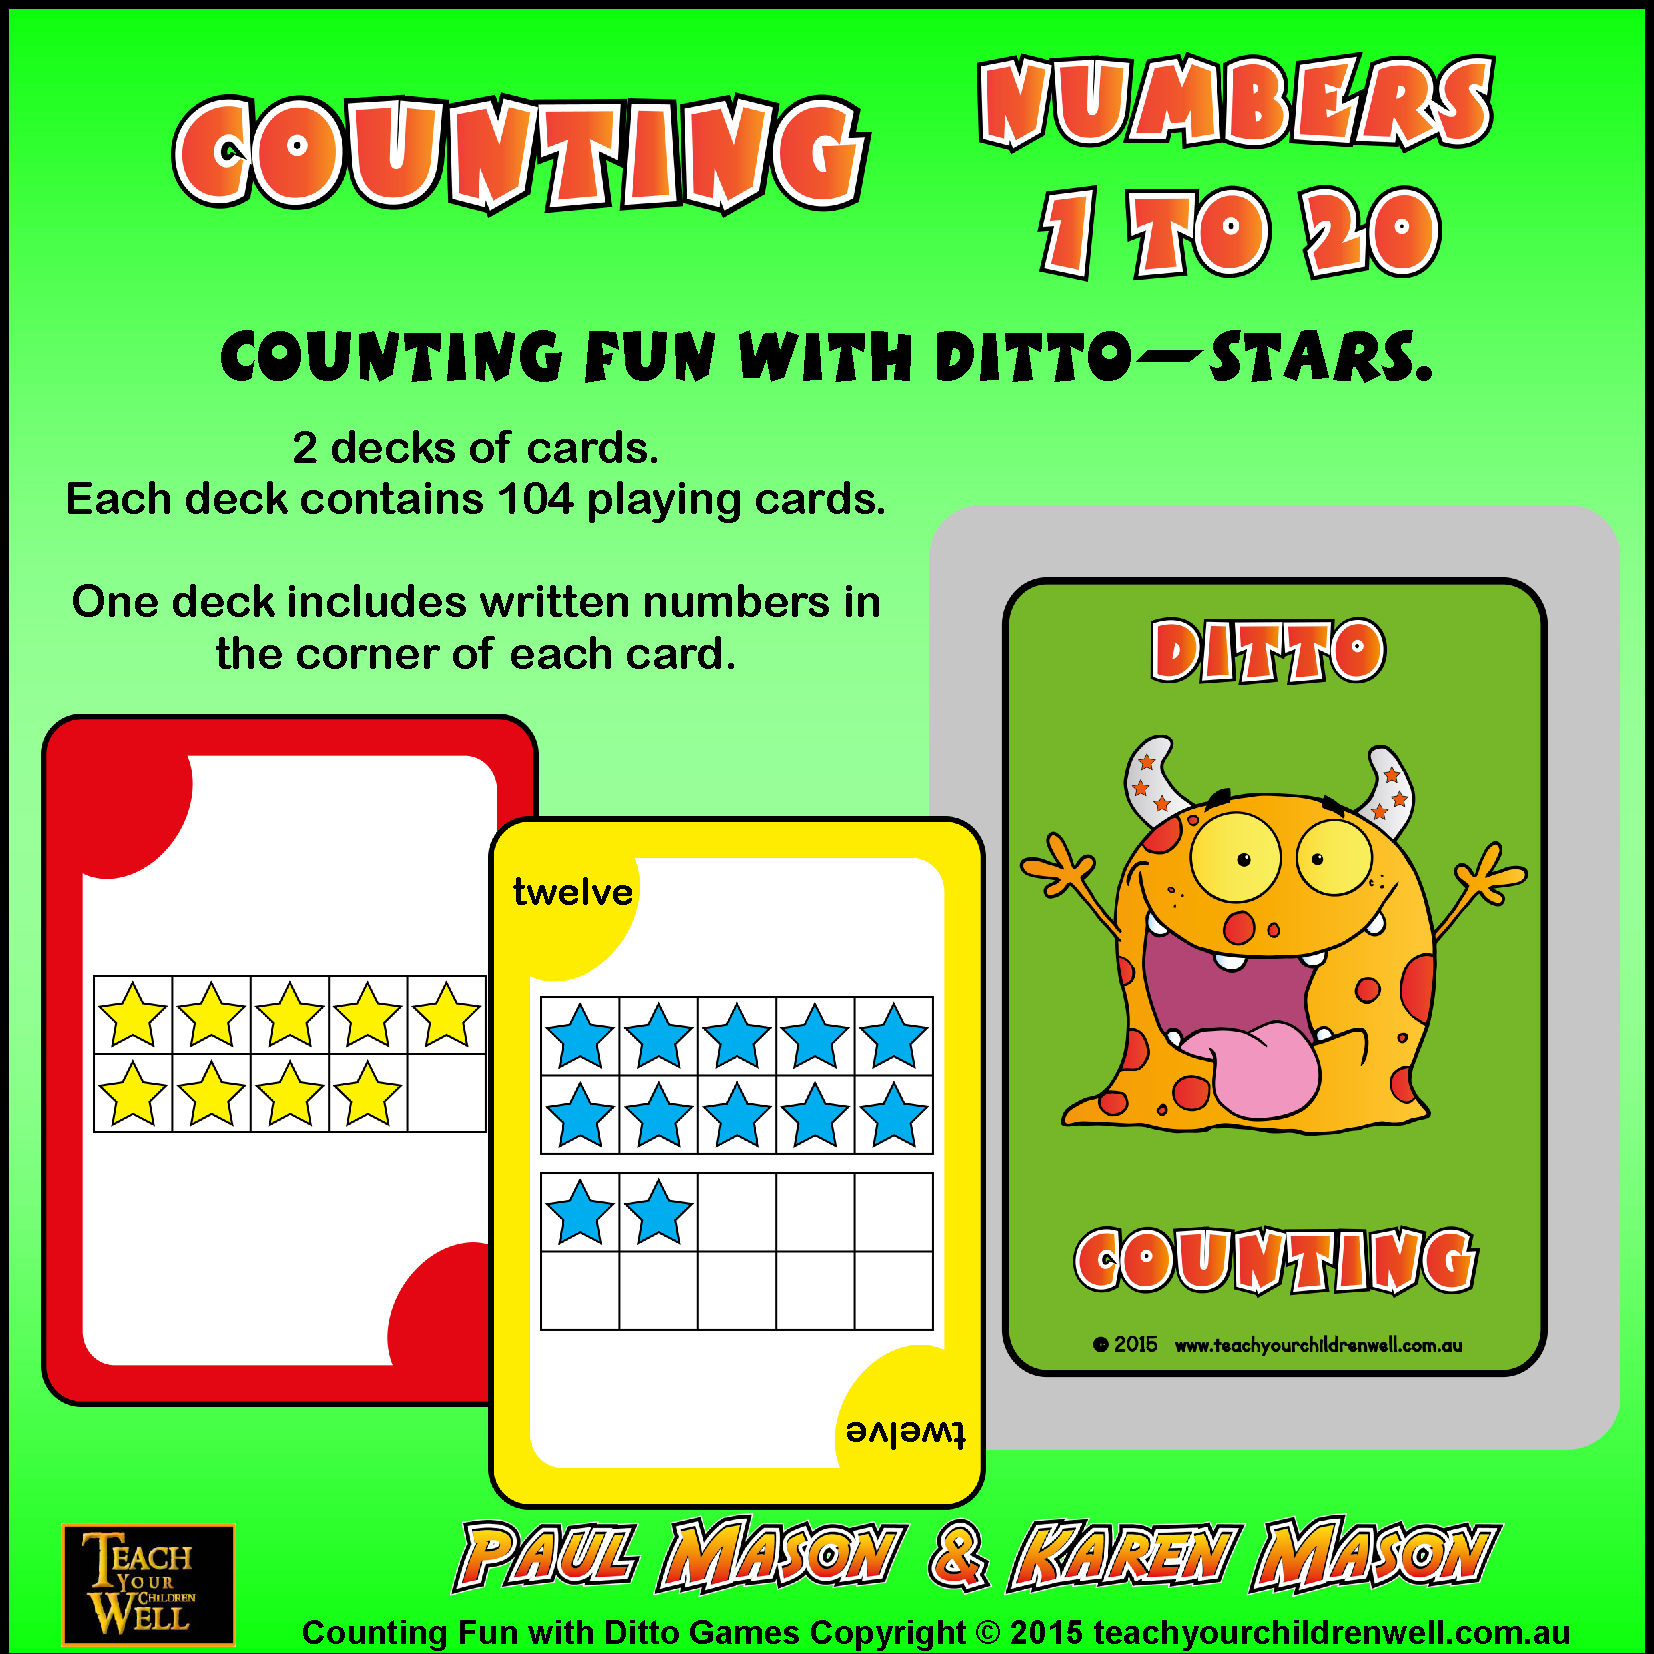 COUNTING NUMBERS 1 TO 20 WITH DITTO - STARS